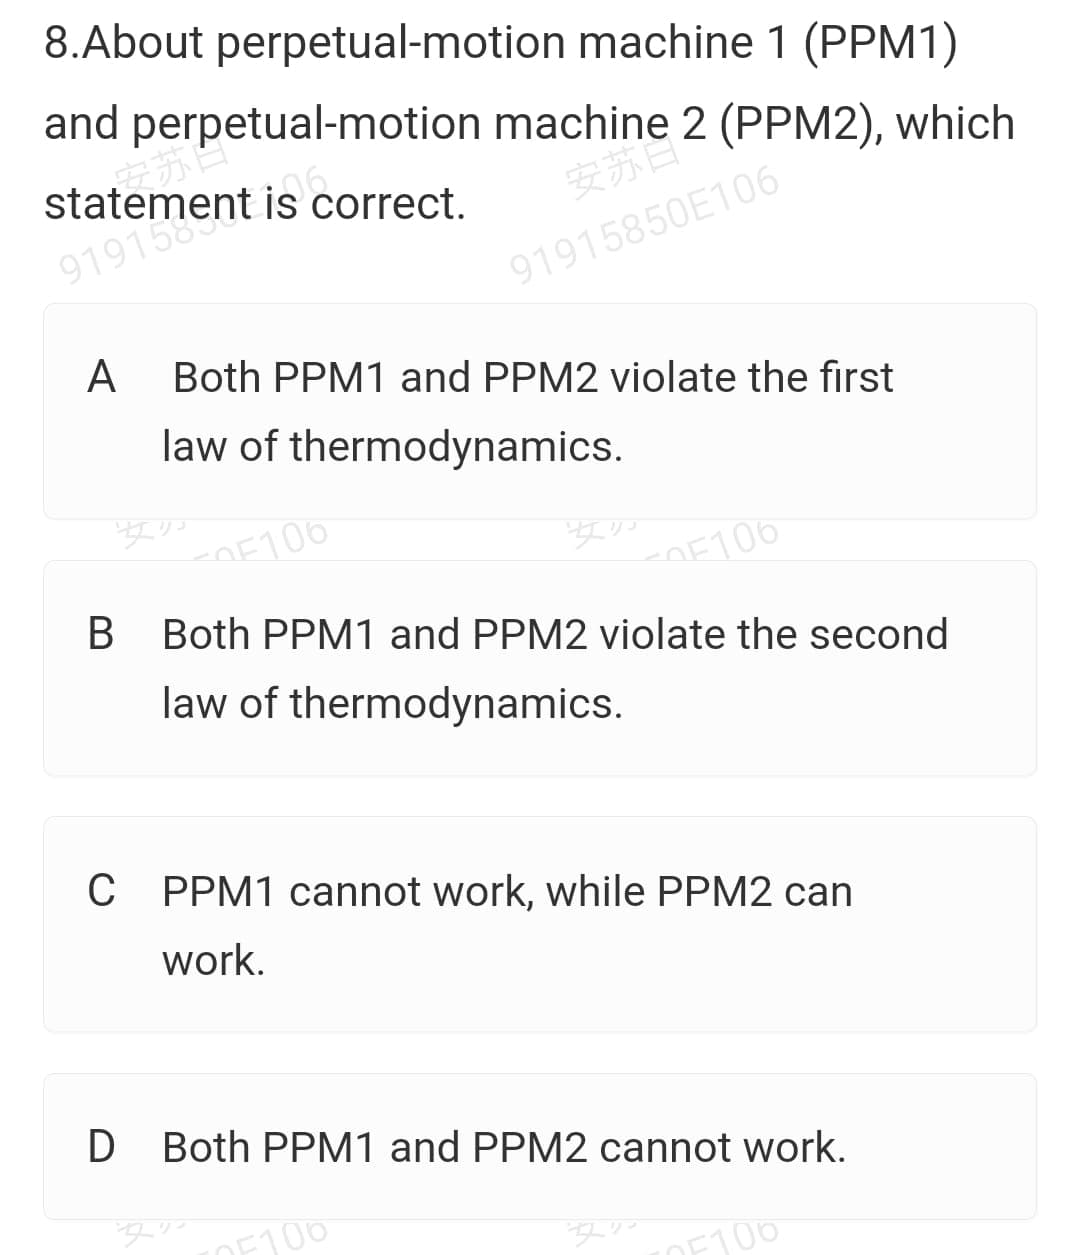 * ermient is correct.
8.About perpetual-motion machine 1 (PPM1)
and perpetual-motion machine 2 (PPM2), which
statement is correct.
安苏
91915850E106
A
Both PPM1 and PPM2 violate the first
law of thermodynamics.
OE106
OE106
Both PPM1 and PPM2 violate the second
law of thermodynamics.
C PPM1 cannot work, while PPM2 can
work.
D Both PPM1 and PPM2 cannot work.
DE100
F100
